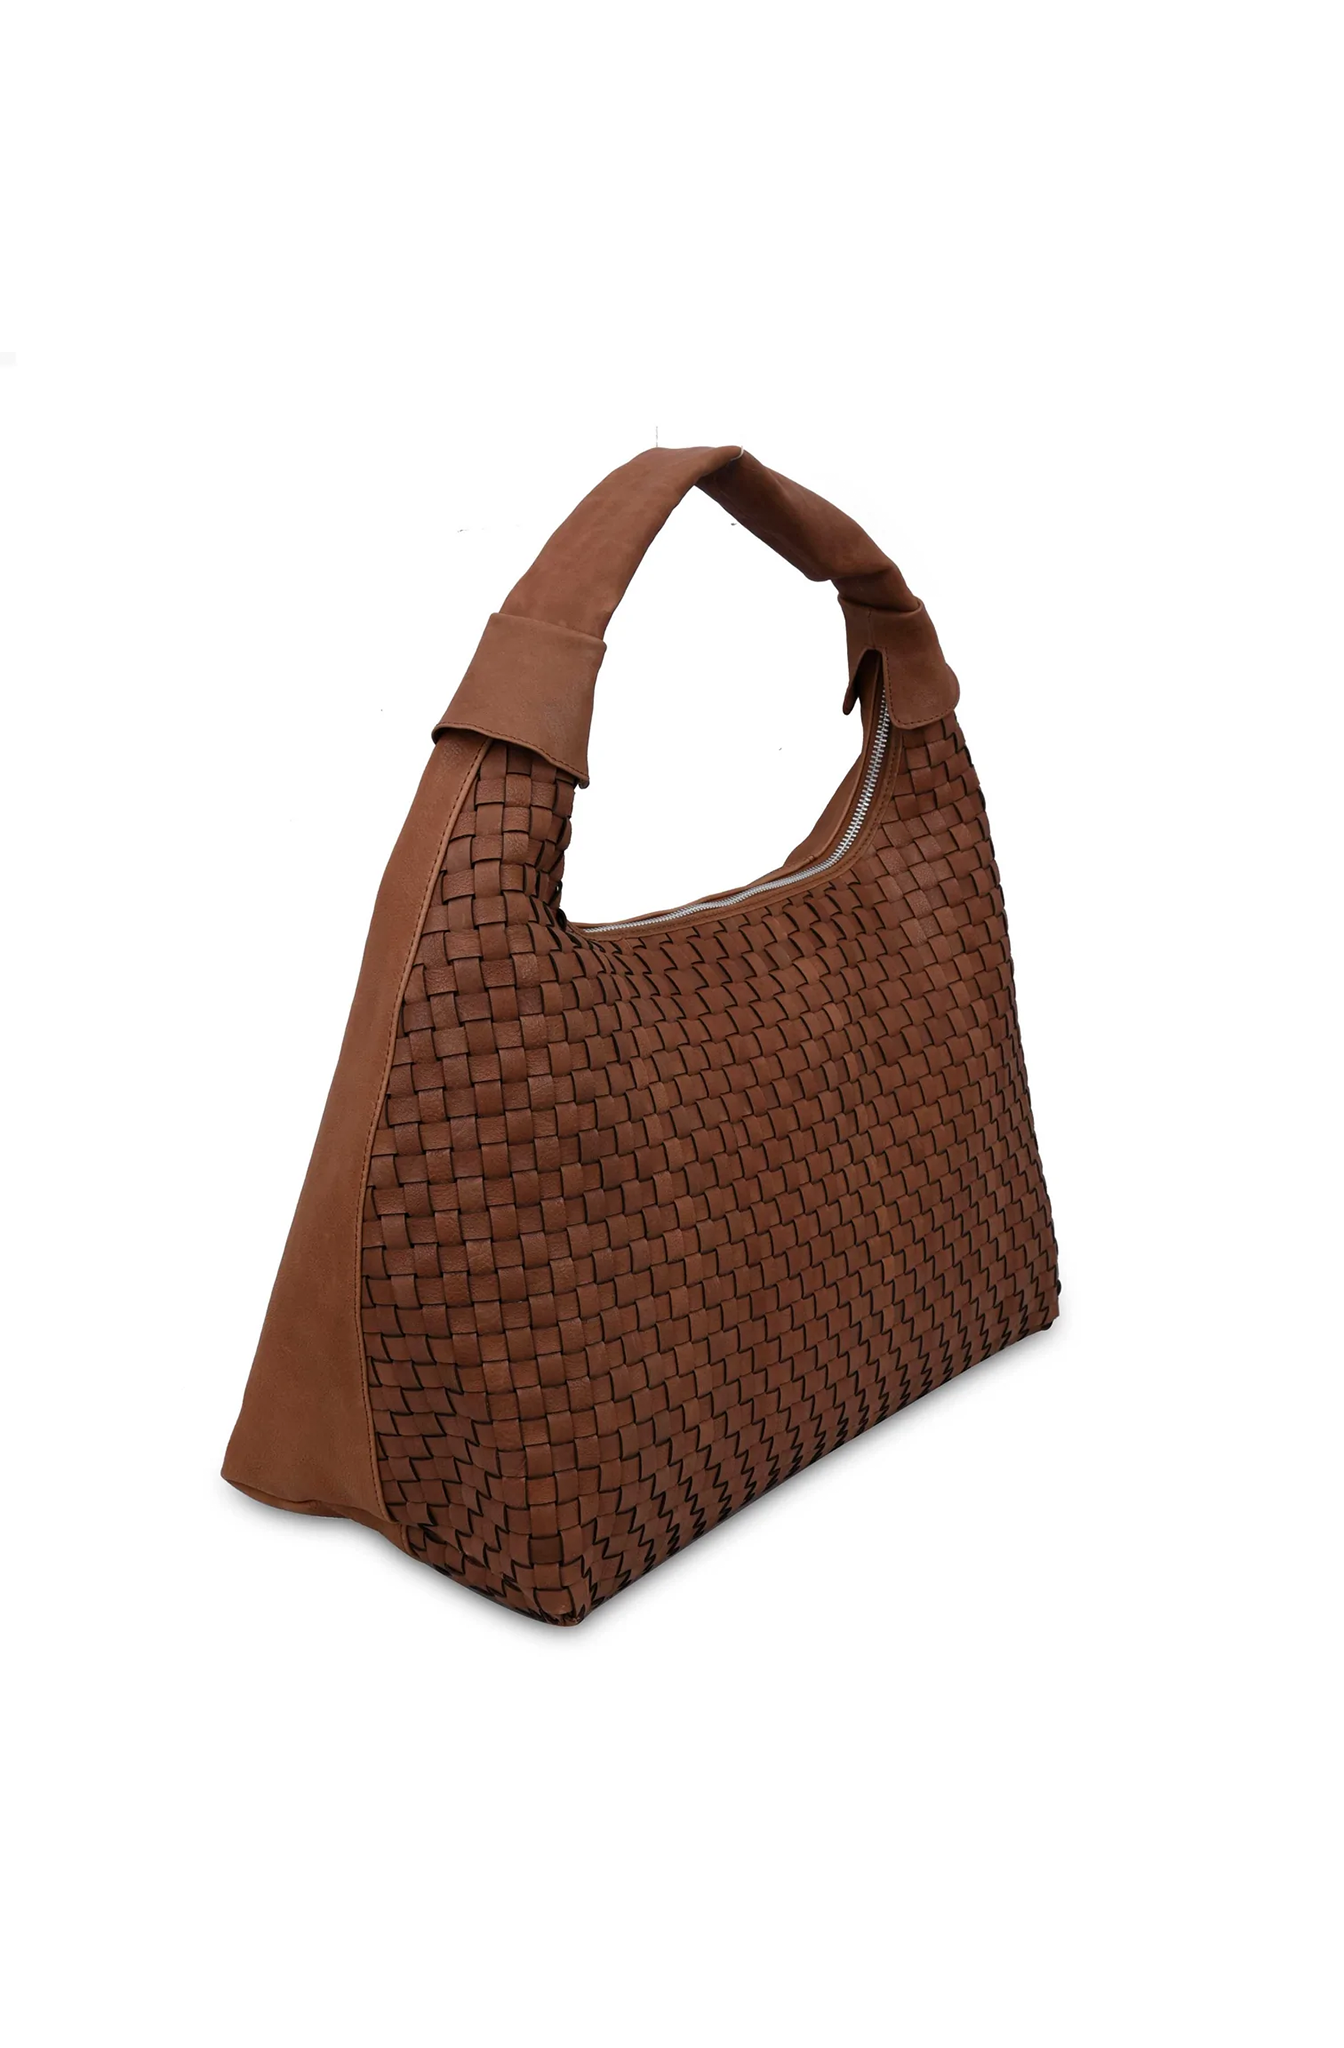 This stylist maxi dandy bag is braided brown leather and has a main compartment with a zip closure.